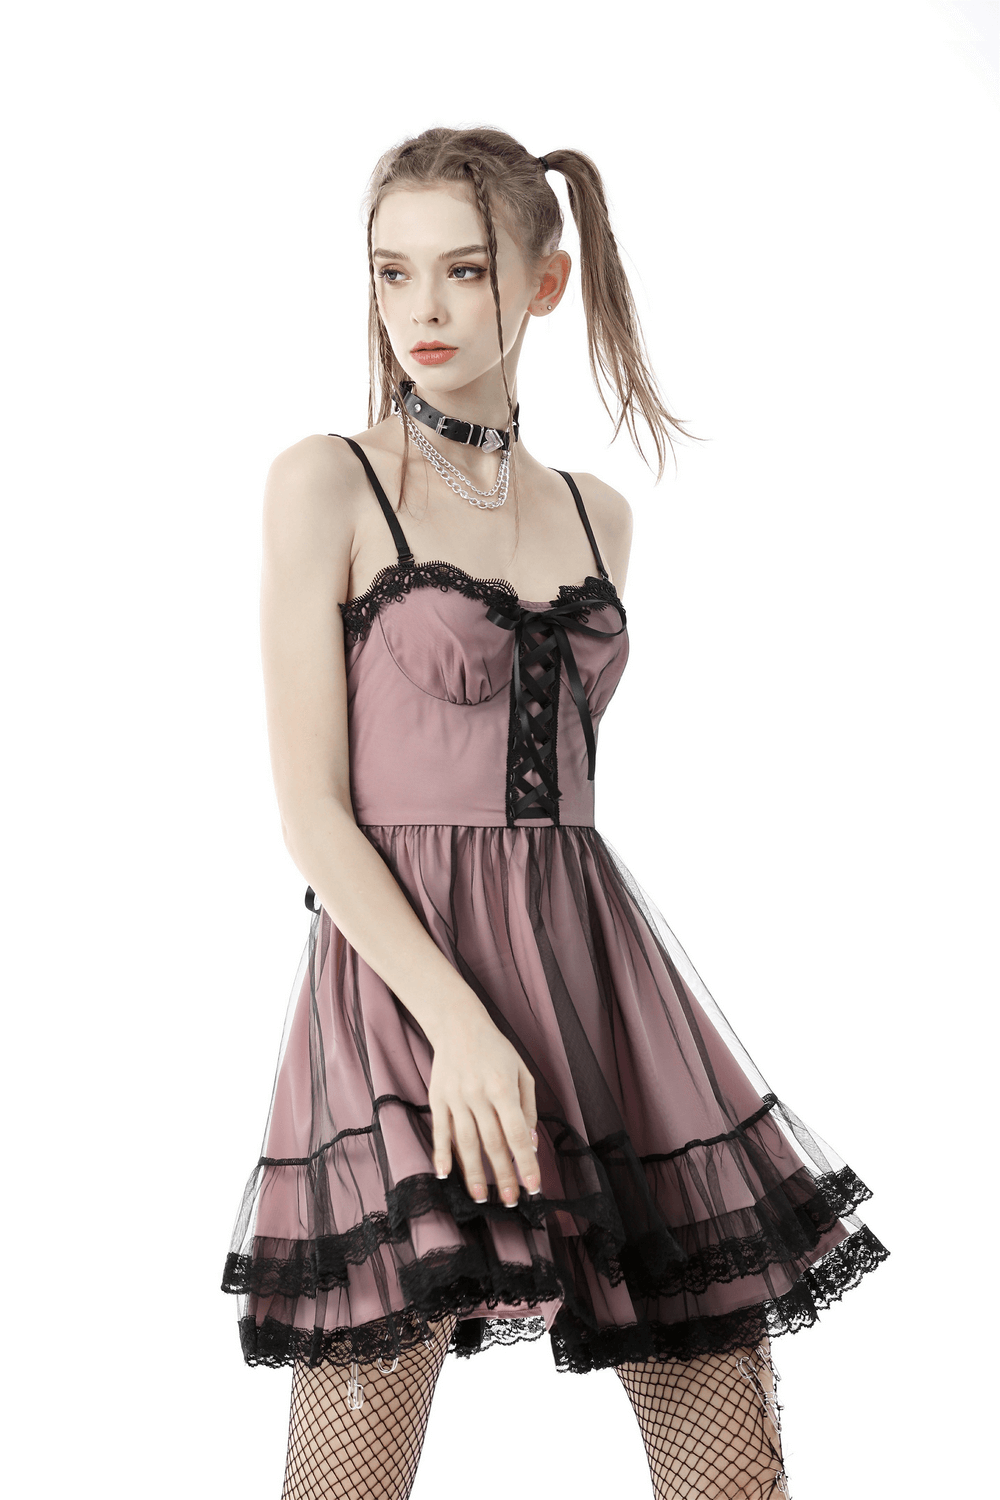 Elegant Lace-Up Dress with Ruffled Hem and Delicate Details